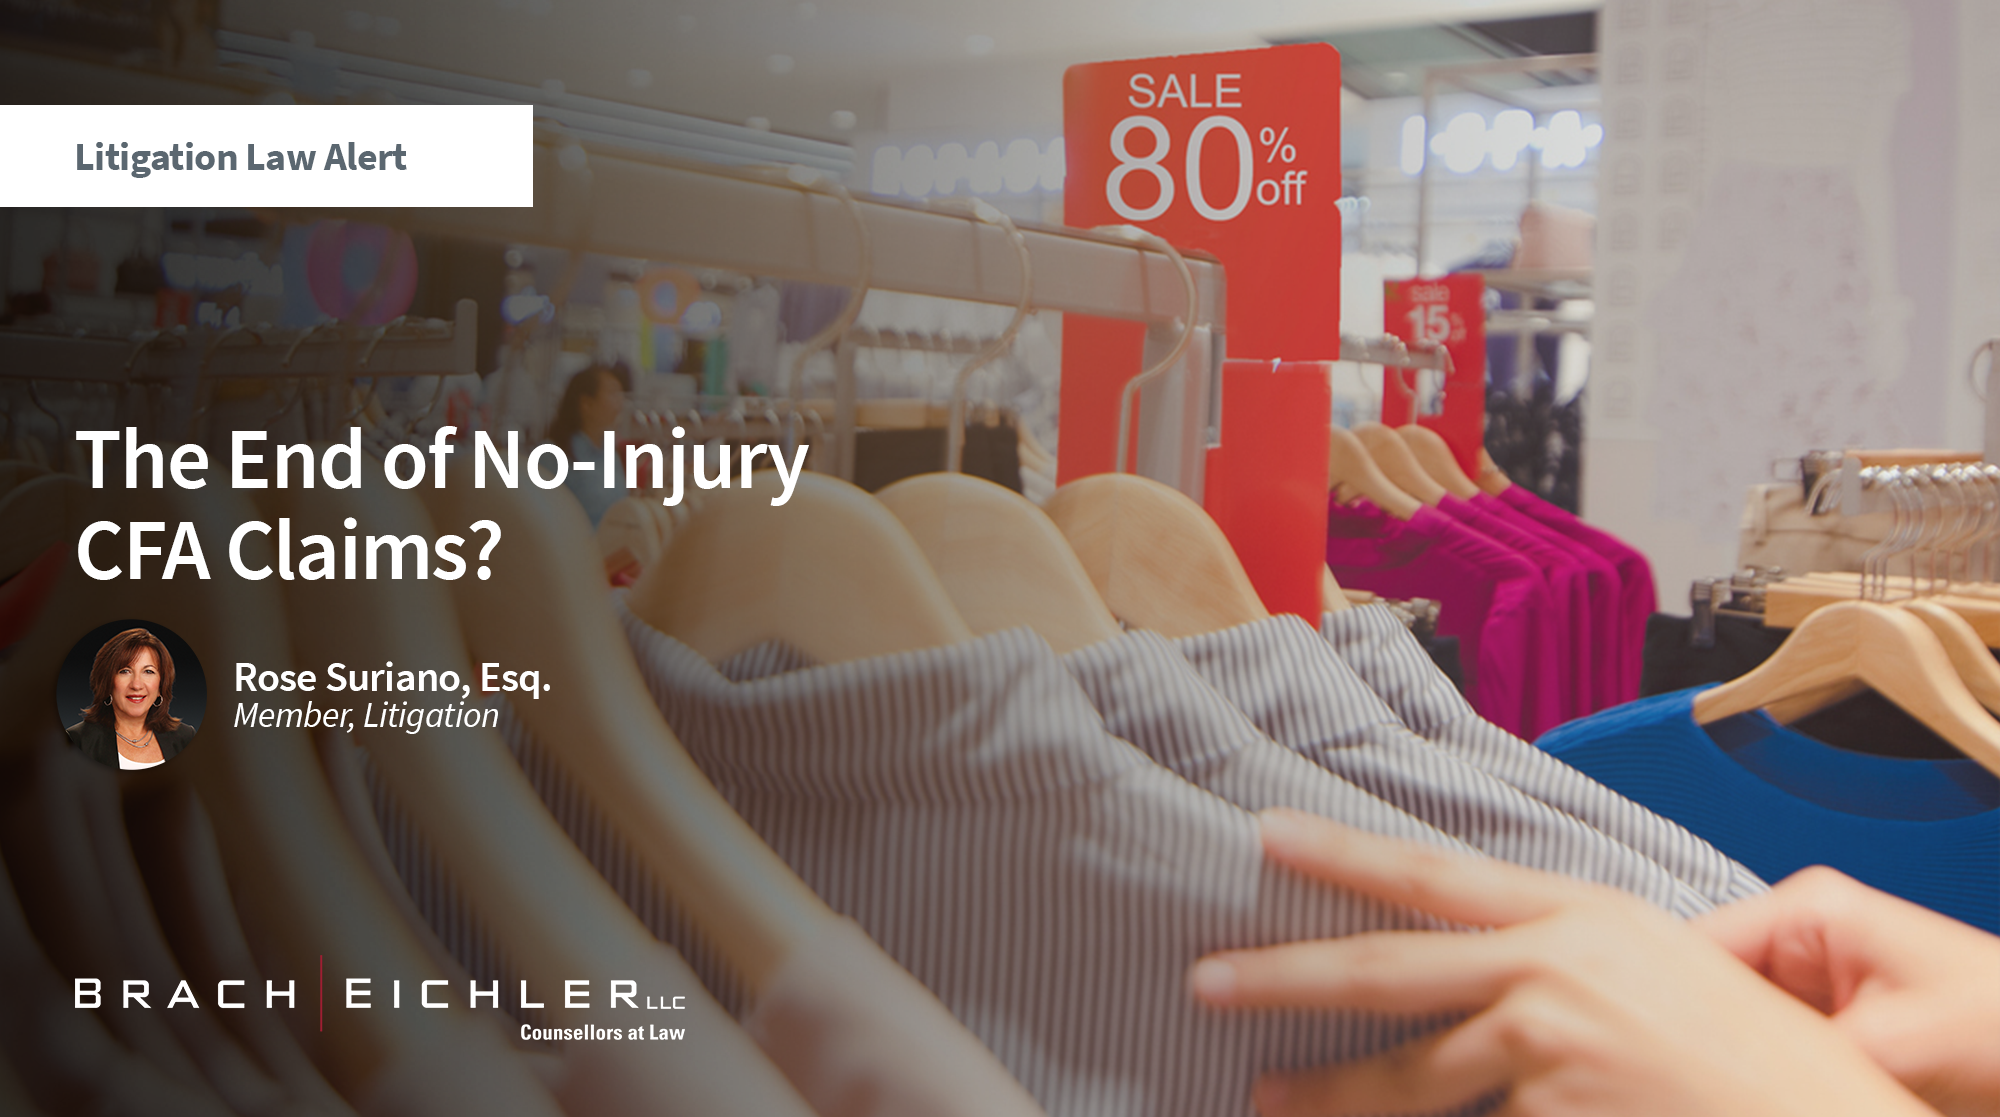 The End of No-Injury CFA Claims? - Litigation Alert - Rose Suriano